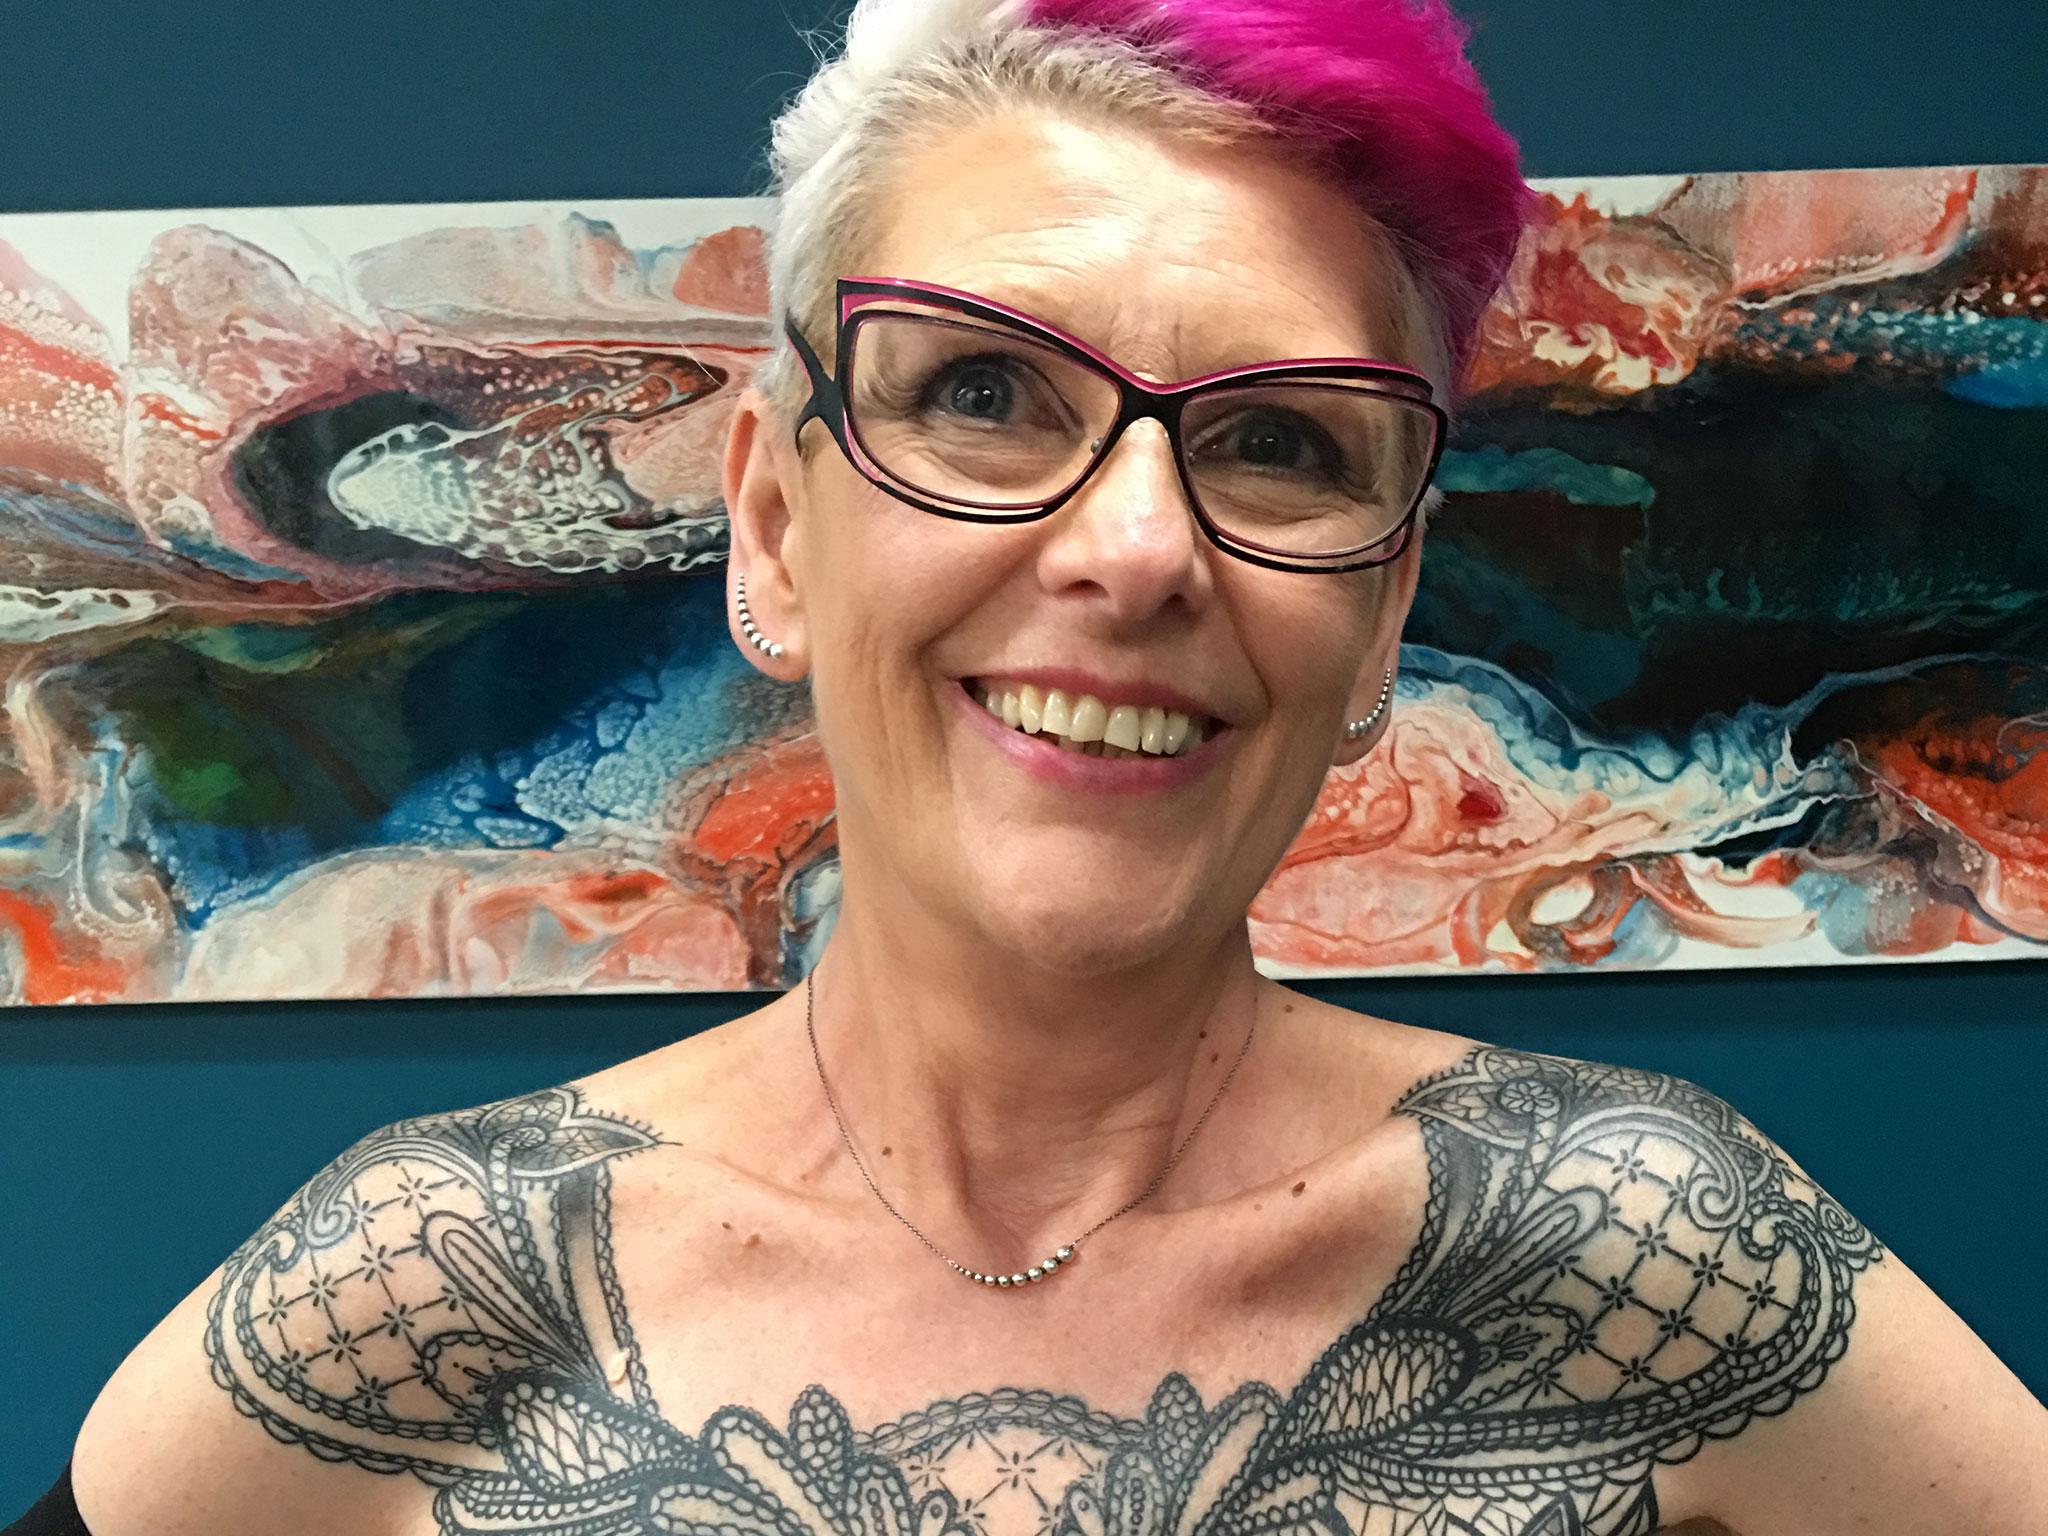 I've regained control over my body': Woman gets chest tattoo to cover mastectomy scars